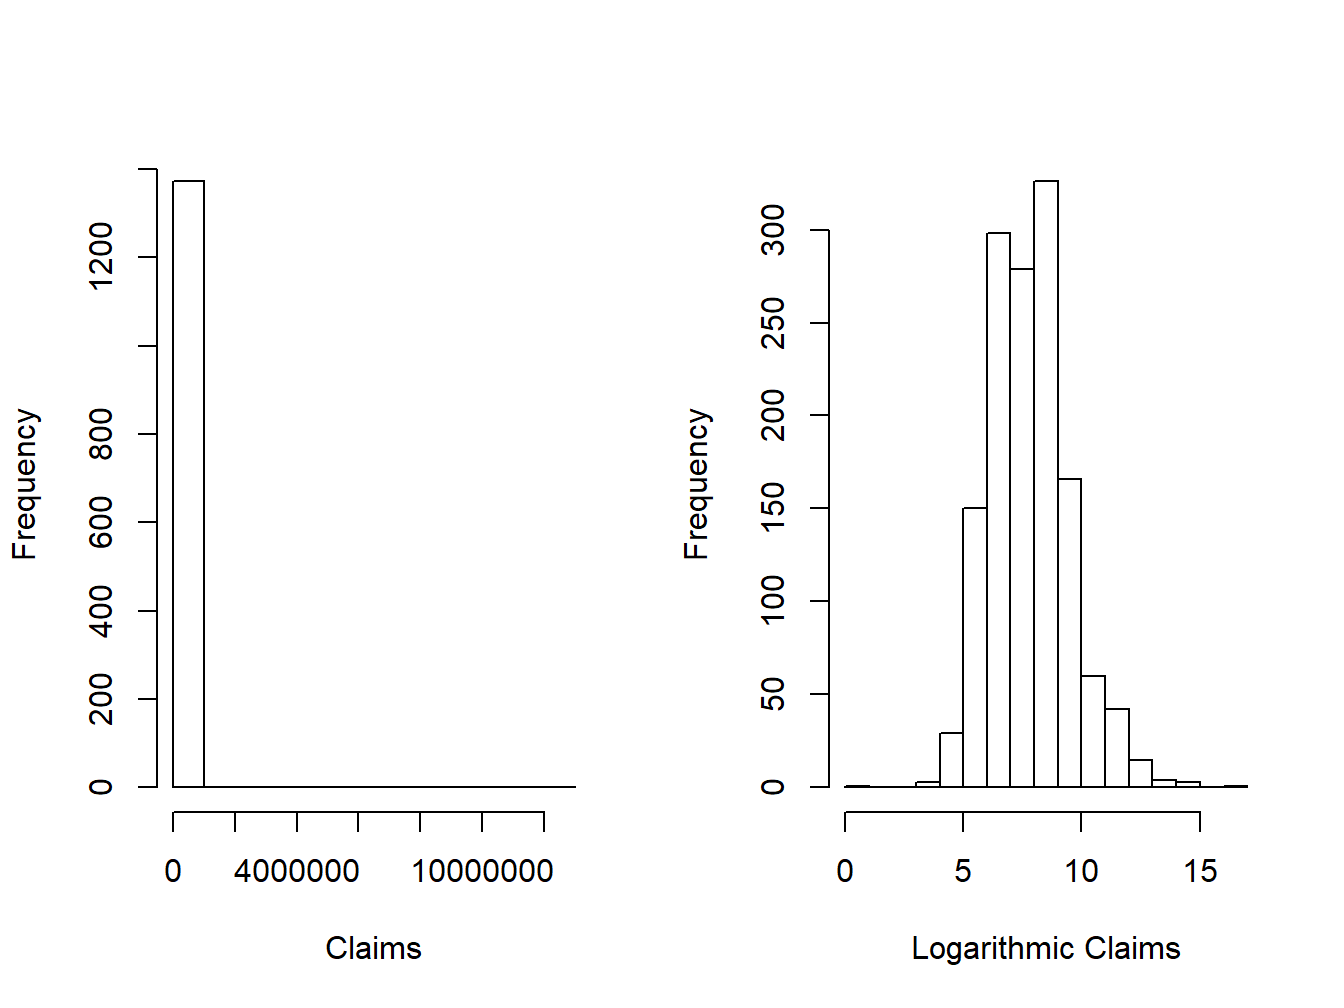 Distribution of Claims